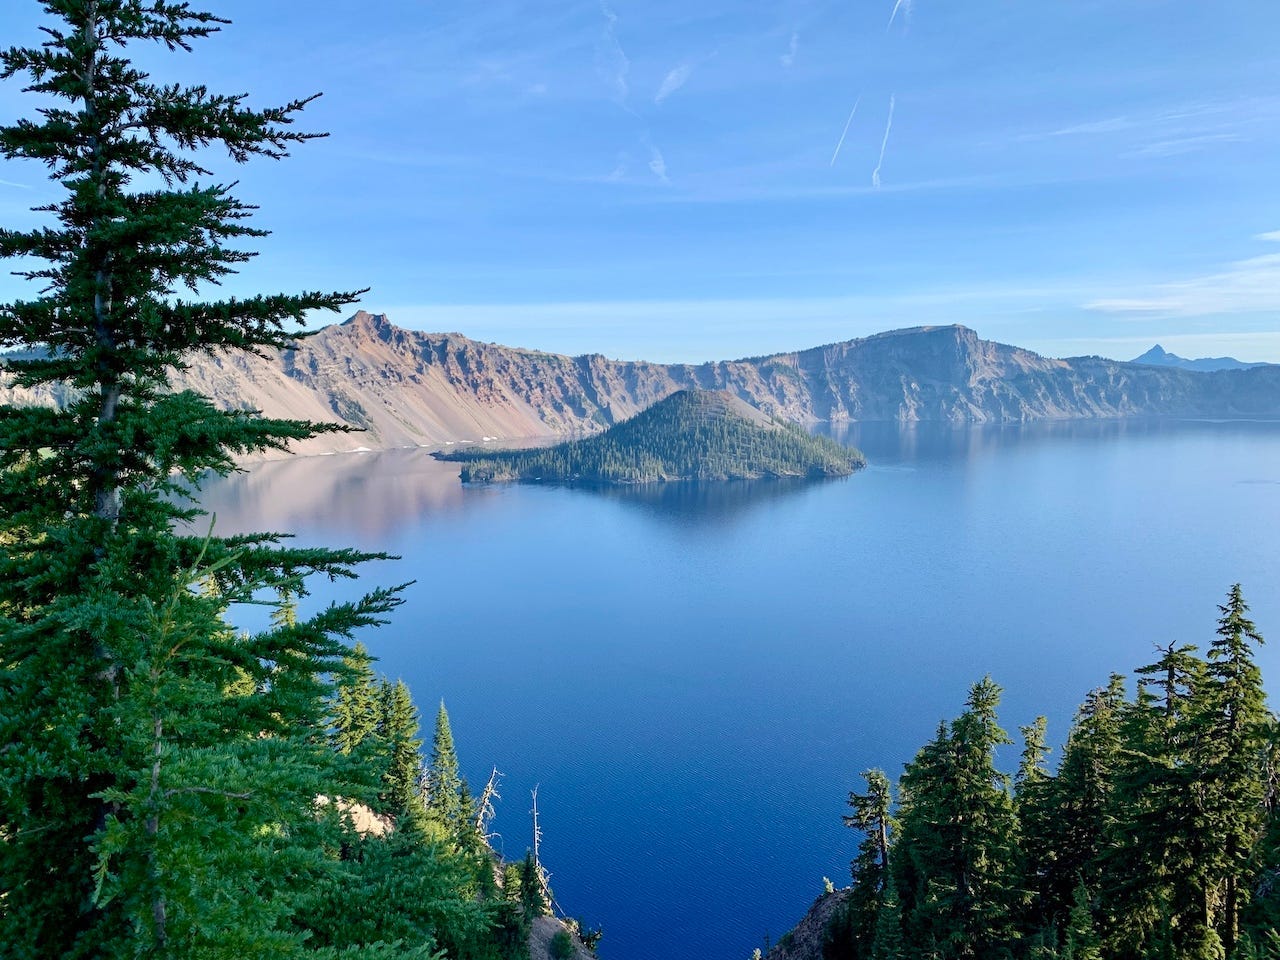 <p>Another national park that the Smiths recommend visiting in the summer is <a href="https://www.businessinsider.com/tourist-helicopteer-crashes-crater-lake-russia-far-east-2021-8">Crater Lake</a> in Oregon. One of the reasons is that many of the roads in the park "don't open until at least July 1," Karen said. </p><p>But, more importantly, the couple say views along the rim of the crater are the most spectacular and unobstructed by clouds during the summer, from July to September. </p>